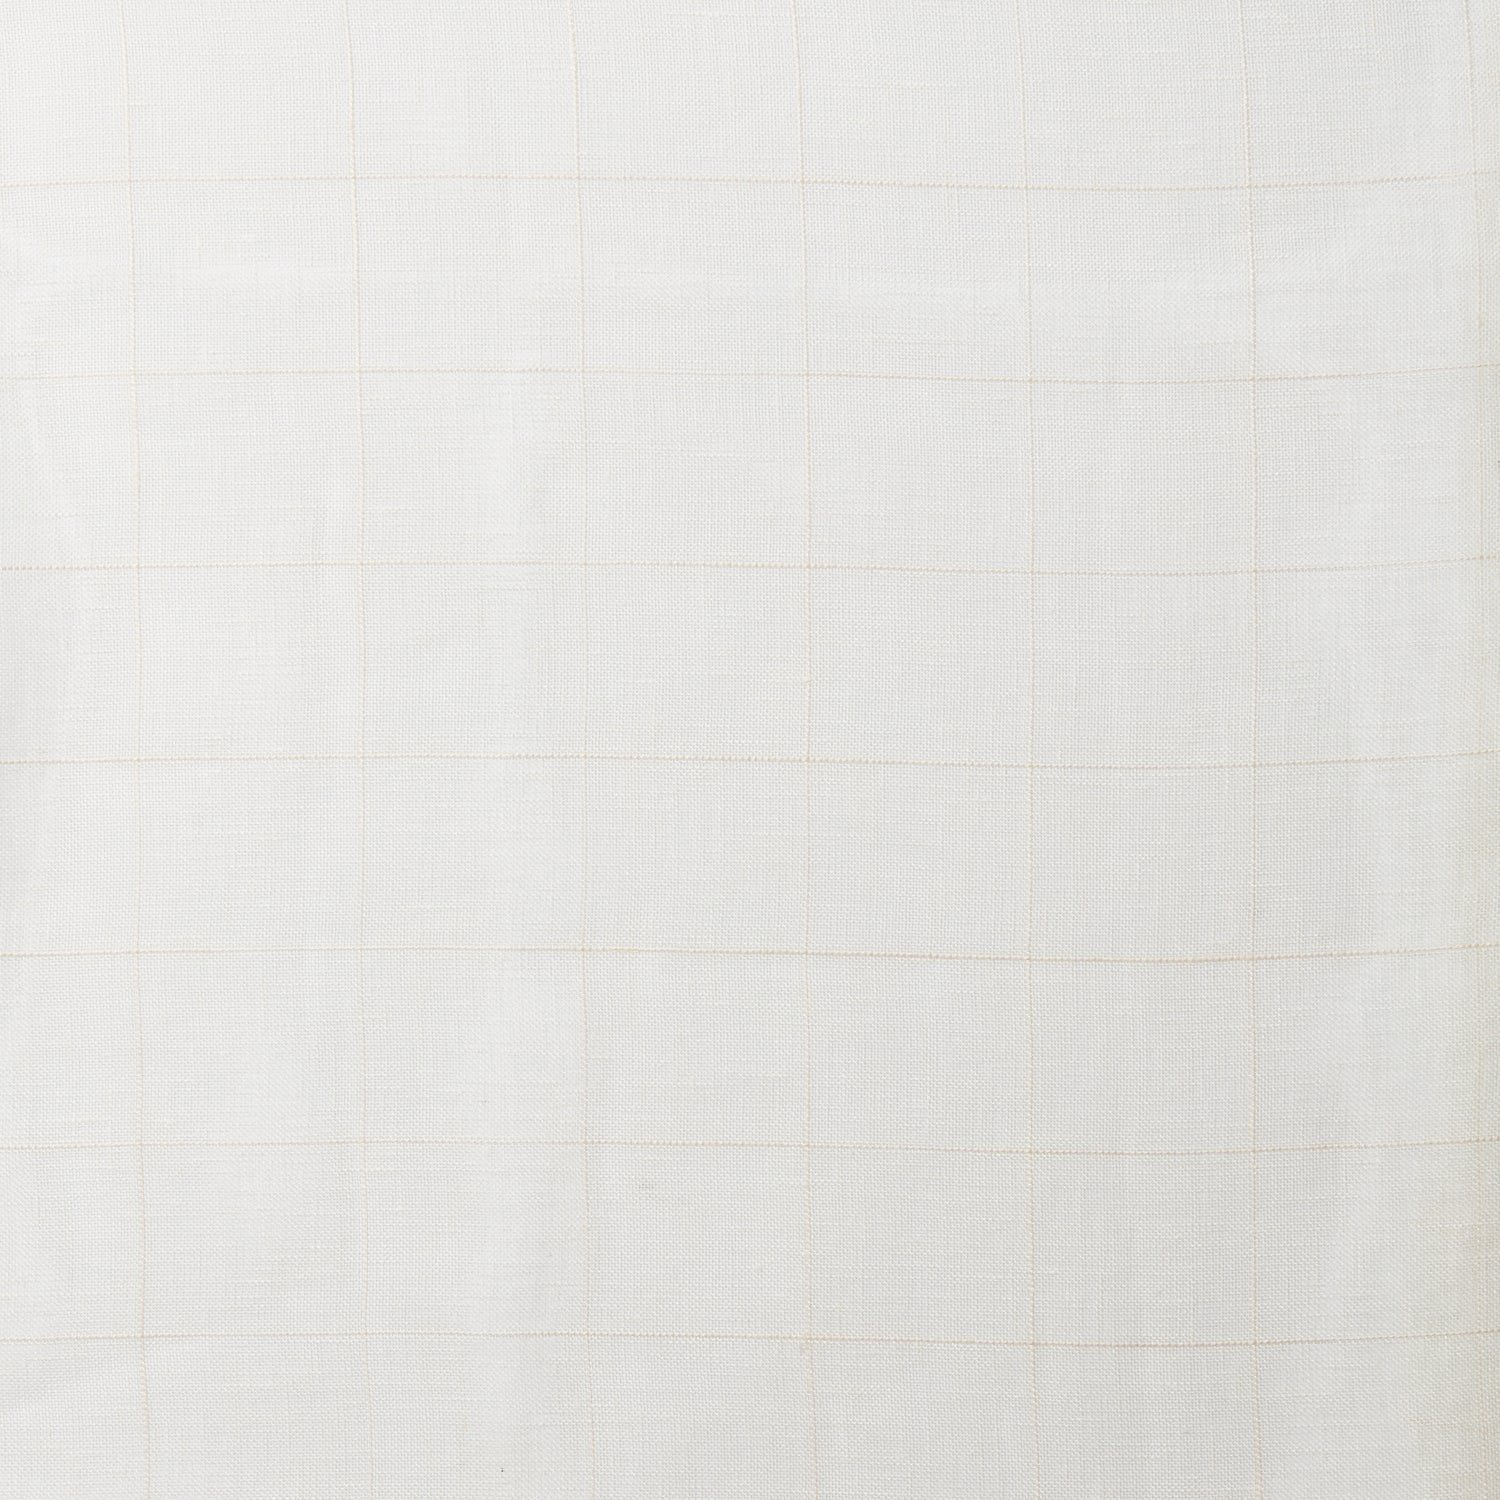 A swatch of sheer linen fabric in a cream color with a subtle checked pattern.